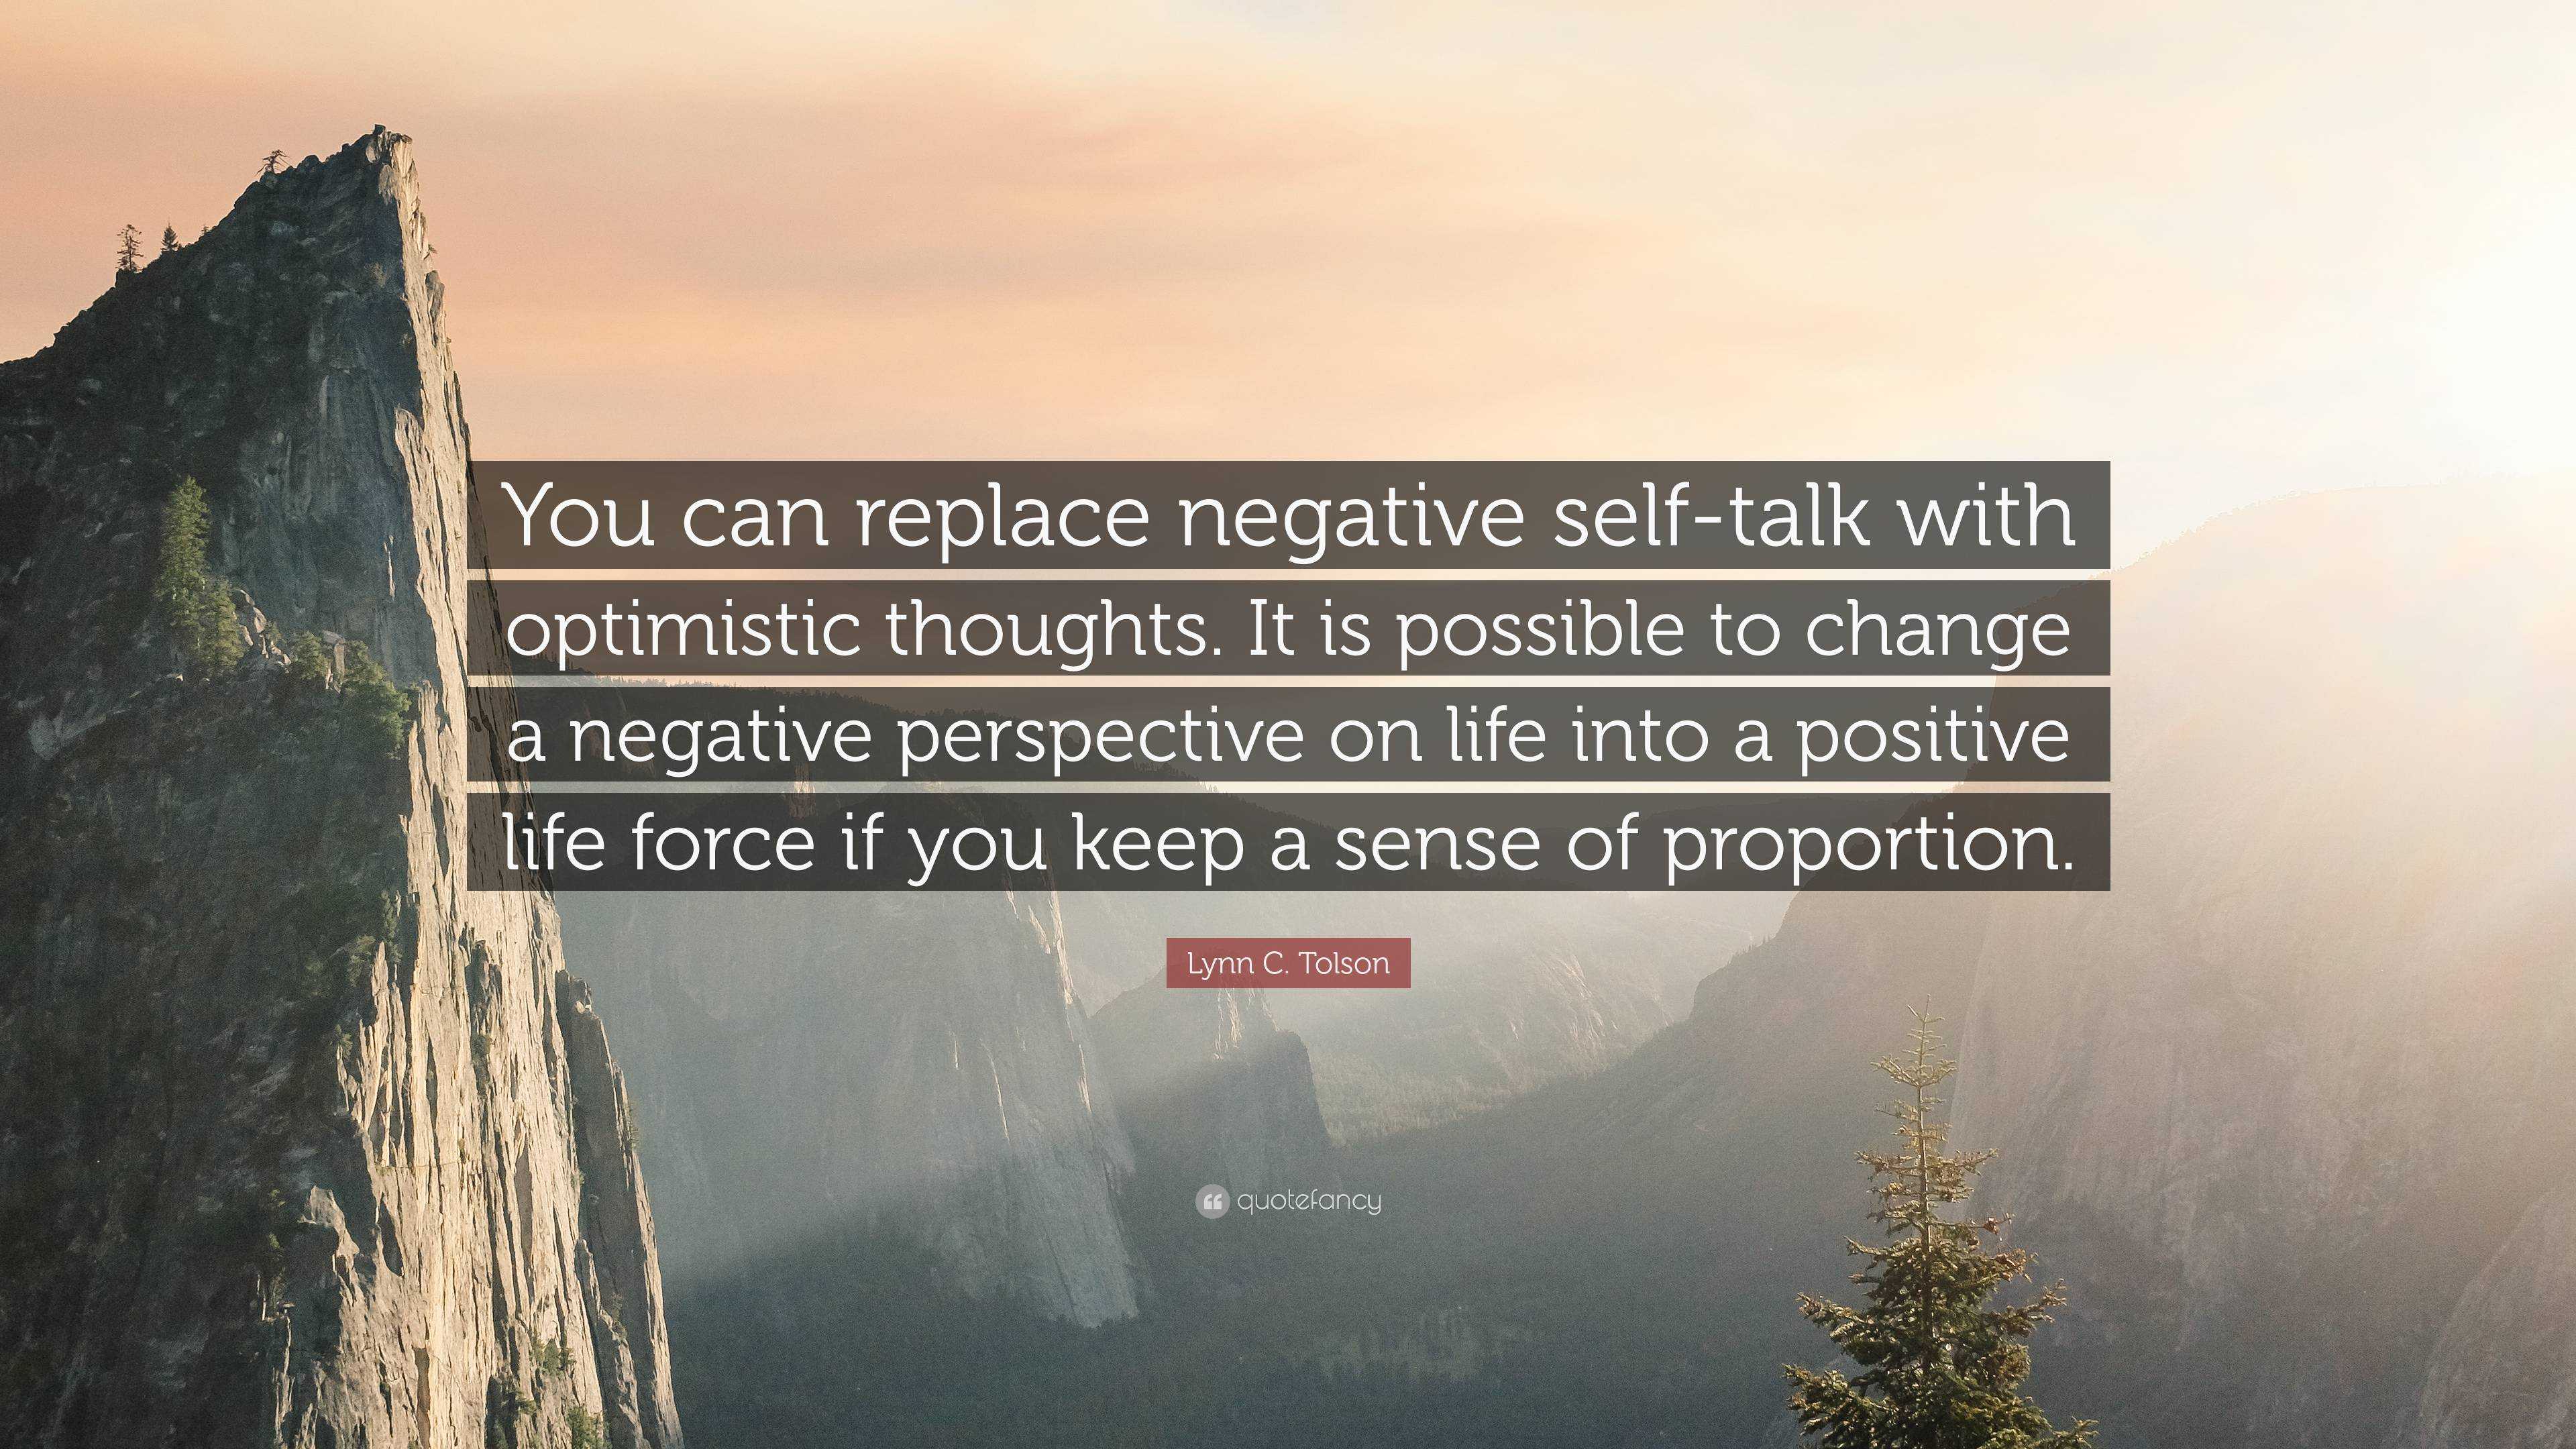 Positive, Self-Talk Can Transform Our Lives: And We ARE Worth It